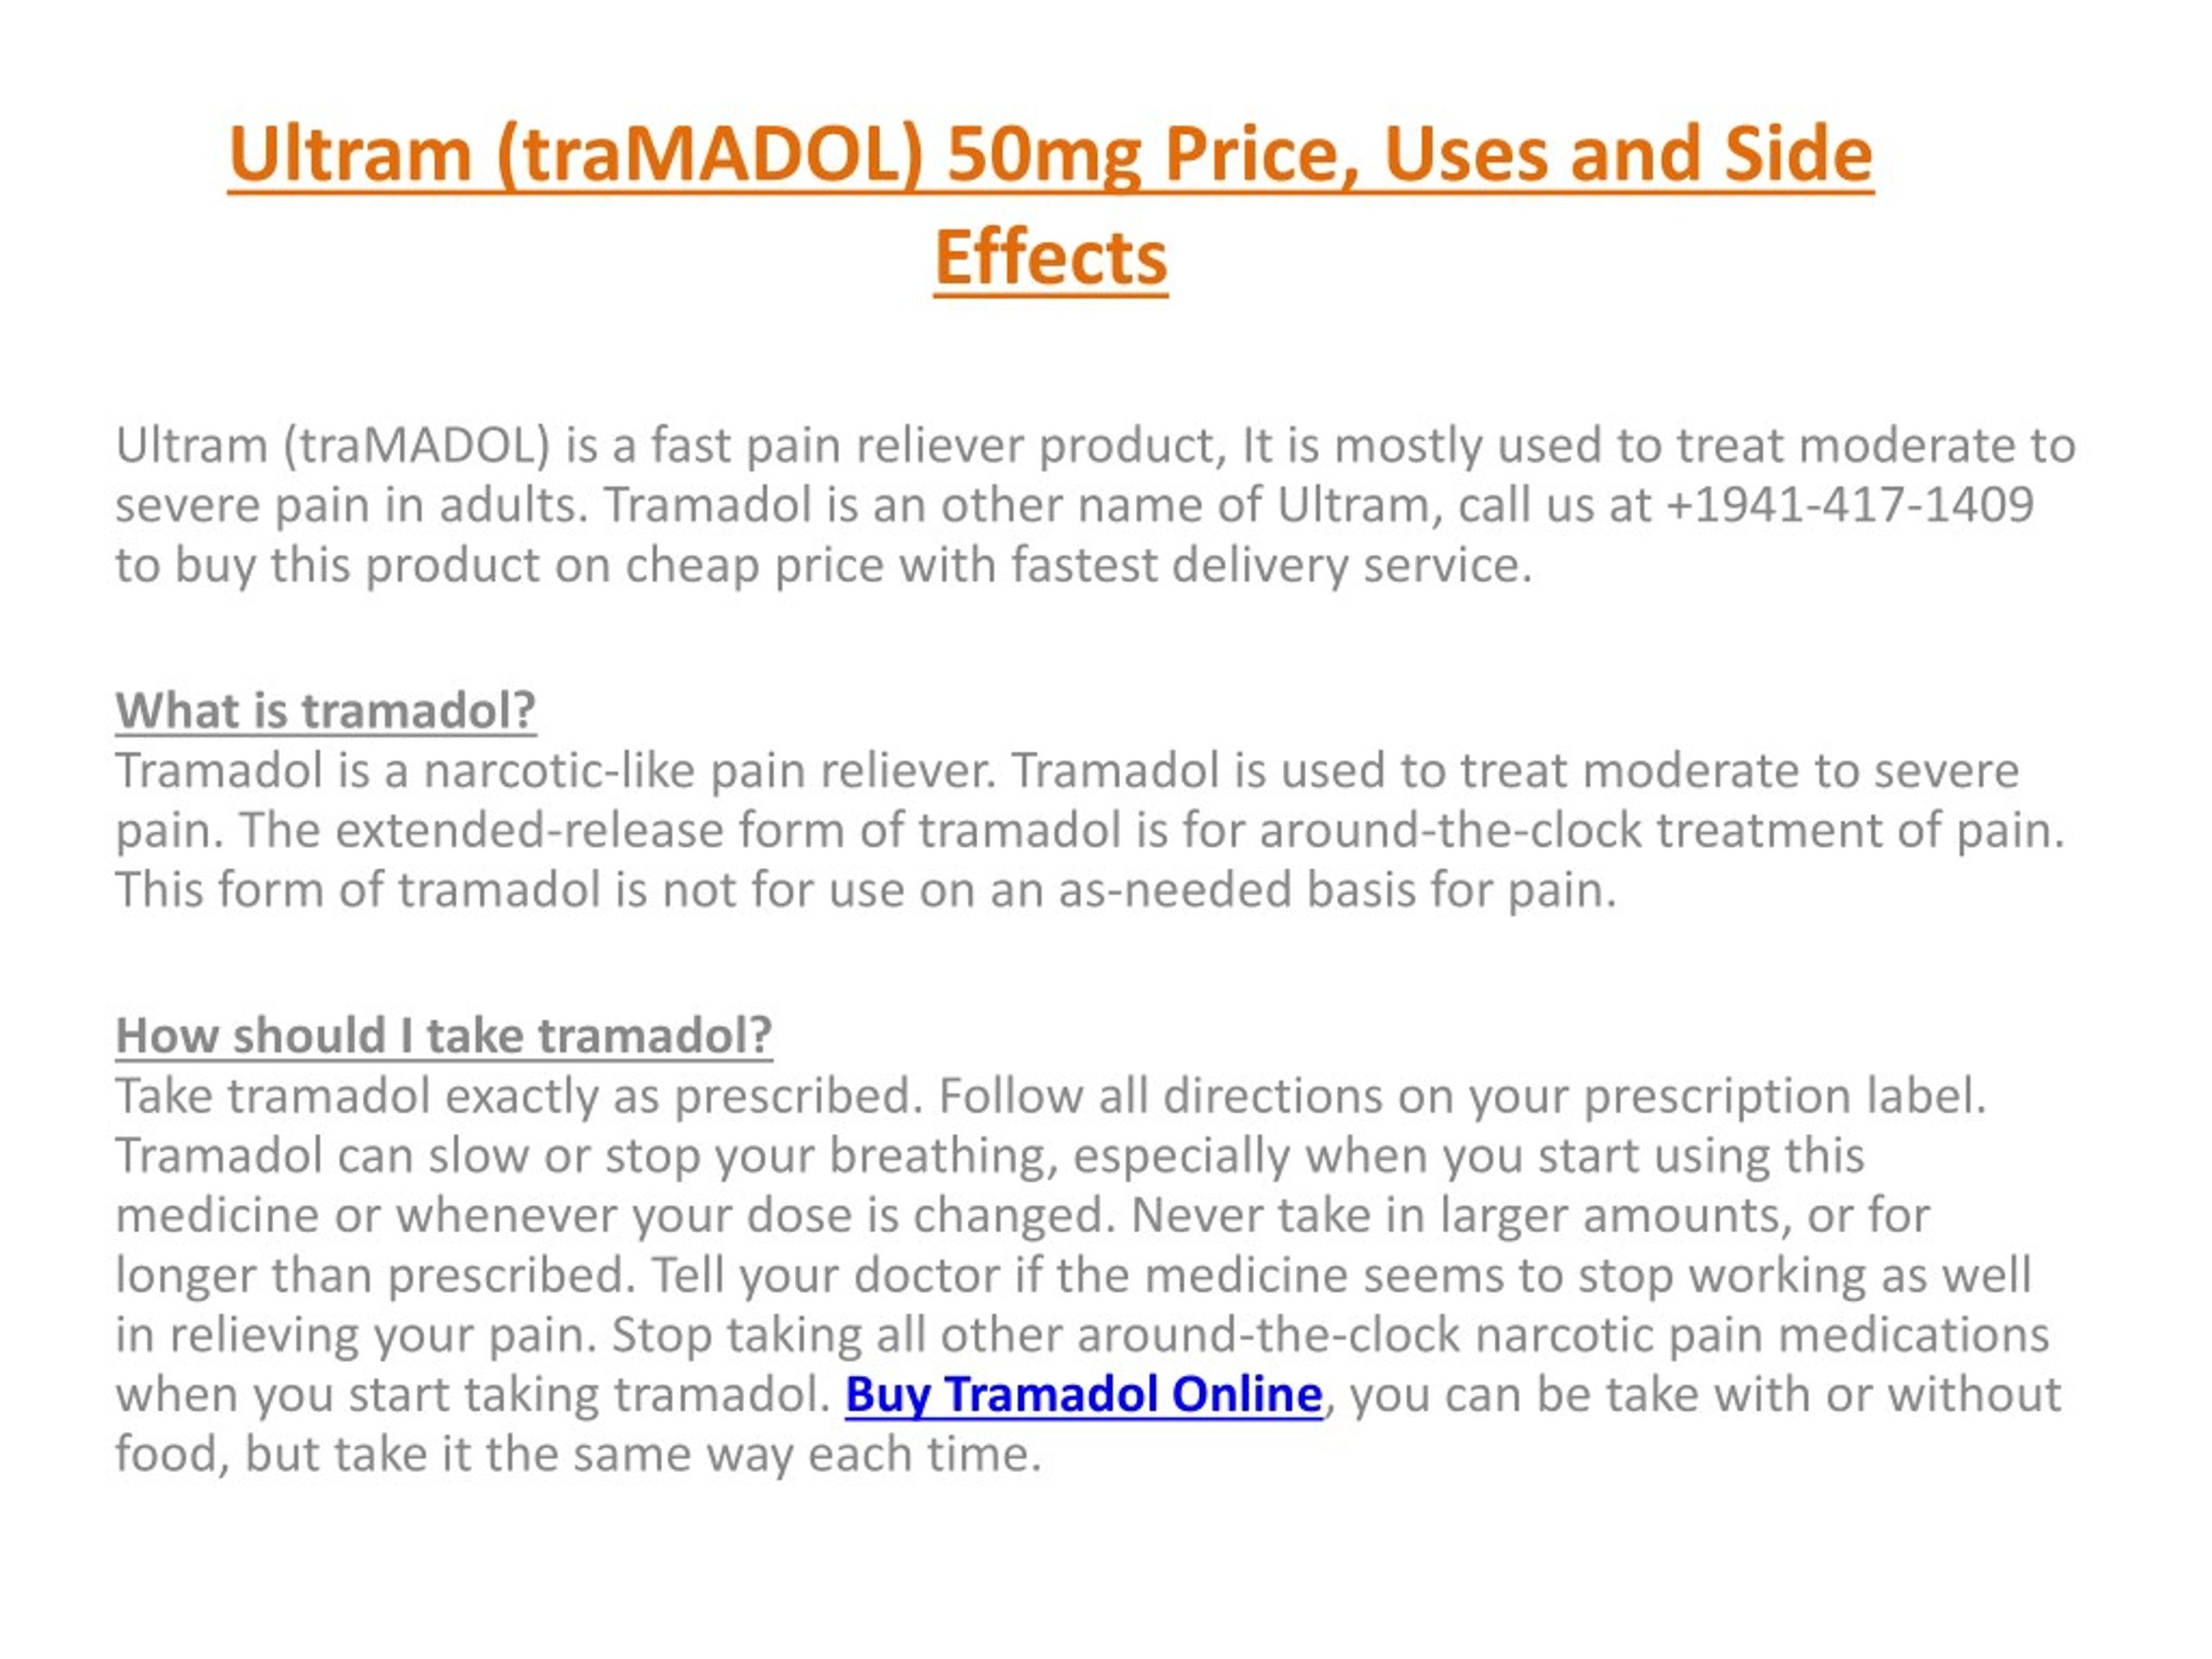 Ppt Ultram Tramadol 50mg Price Uses And Side Effects Powerpoint Presentation Id